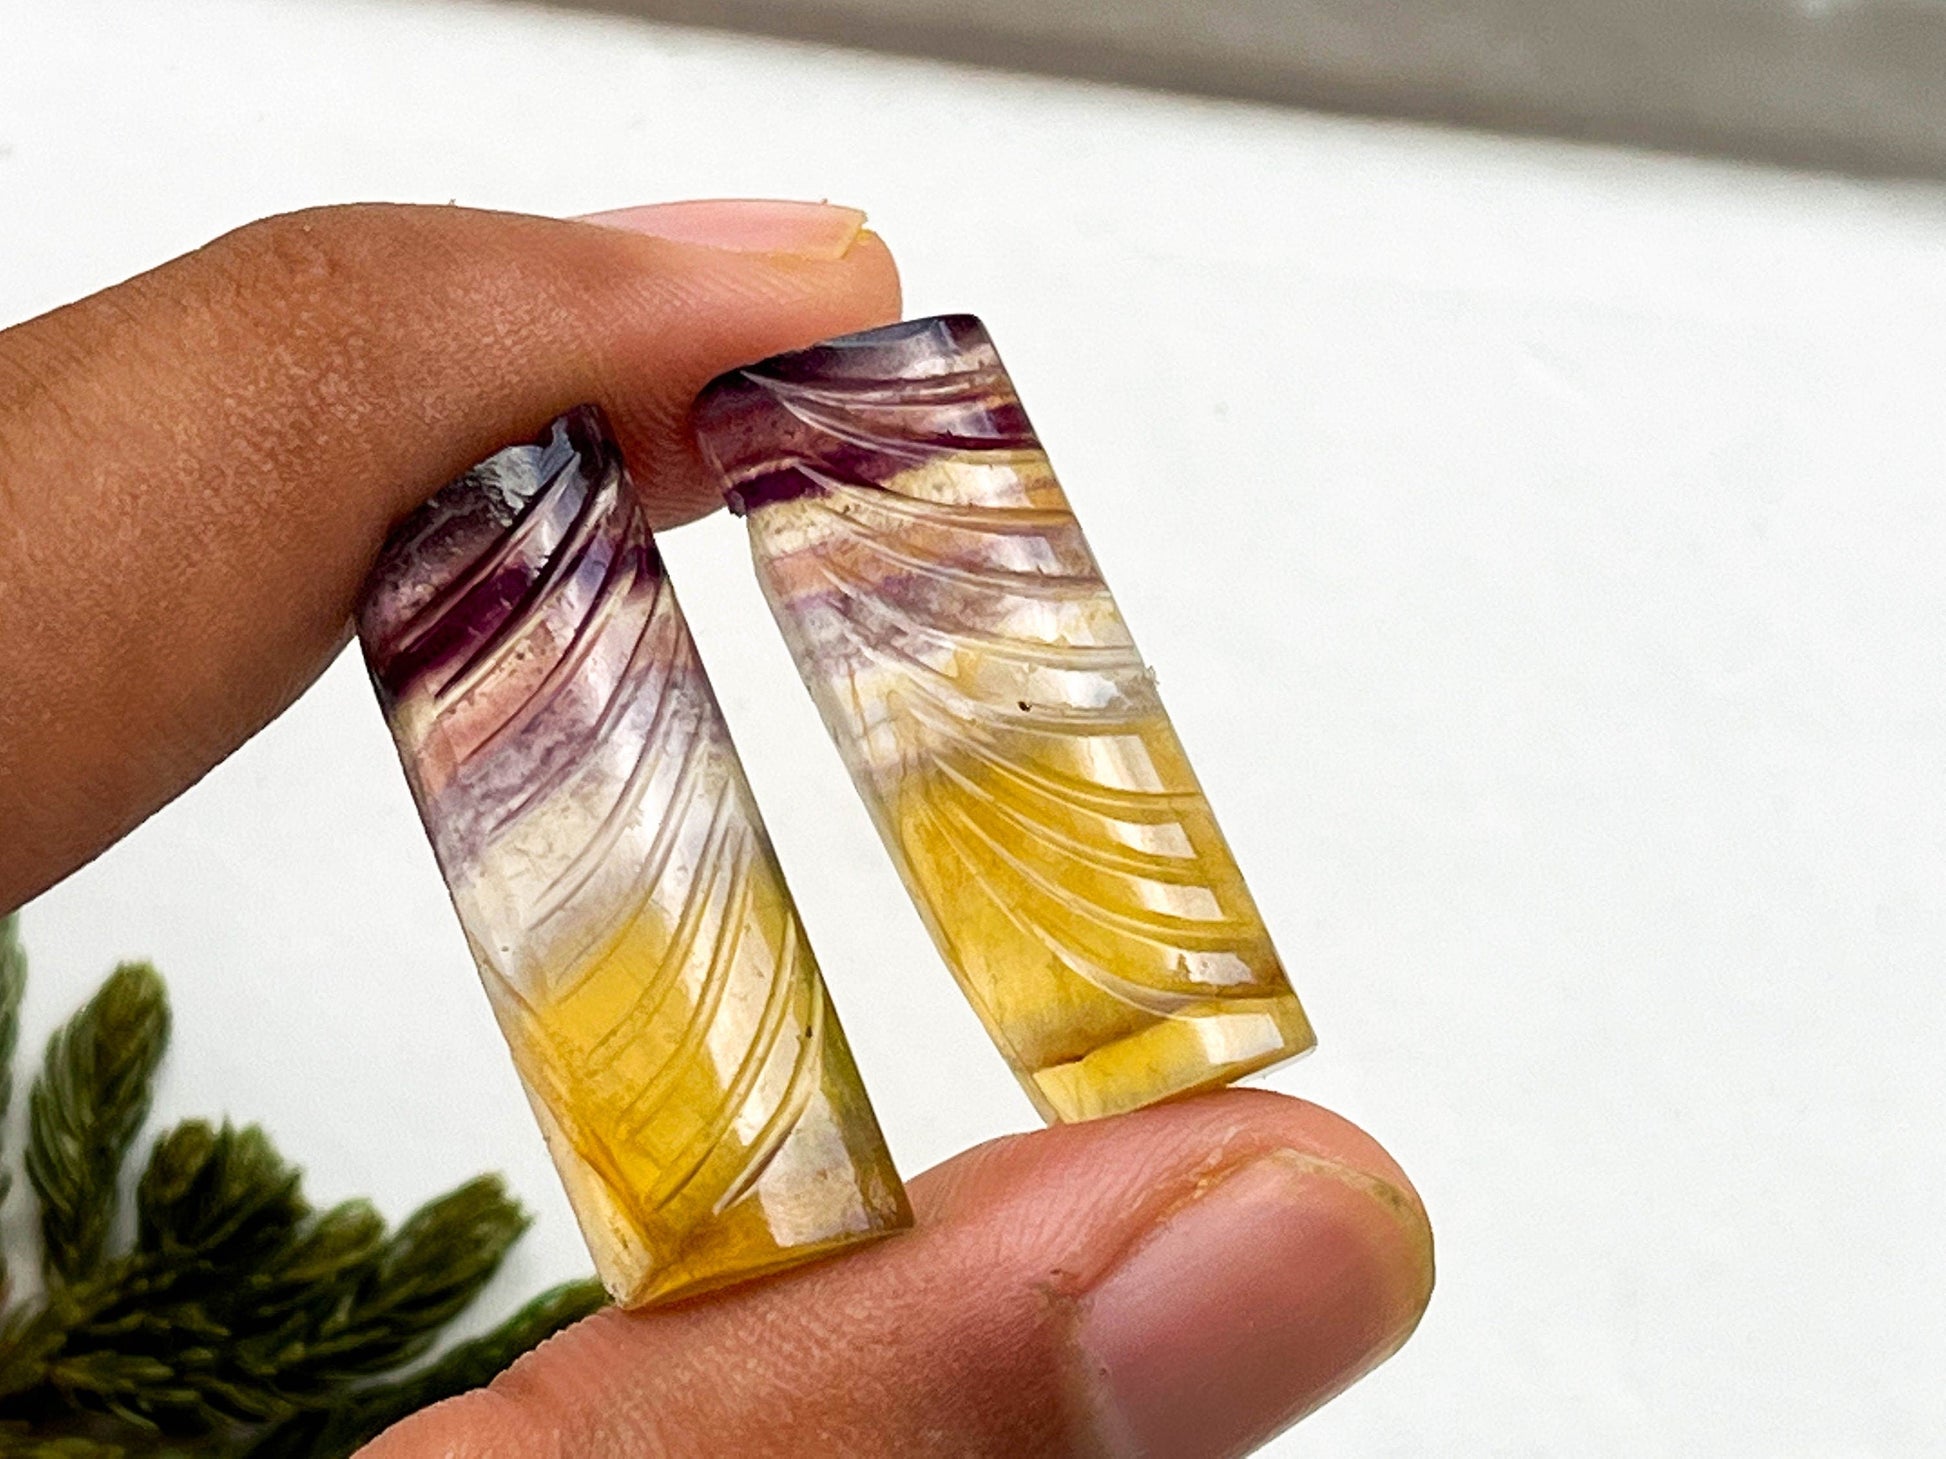 Rare Multi Fluorite Gemstone, 12x30mm, Matching Pair, Fancy Shape Carving Cabochon Pair, Natural AAA+ Multi Fluorite Gemstone Loose Cabochon BFYJ Beadsforyourjewelry